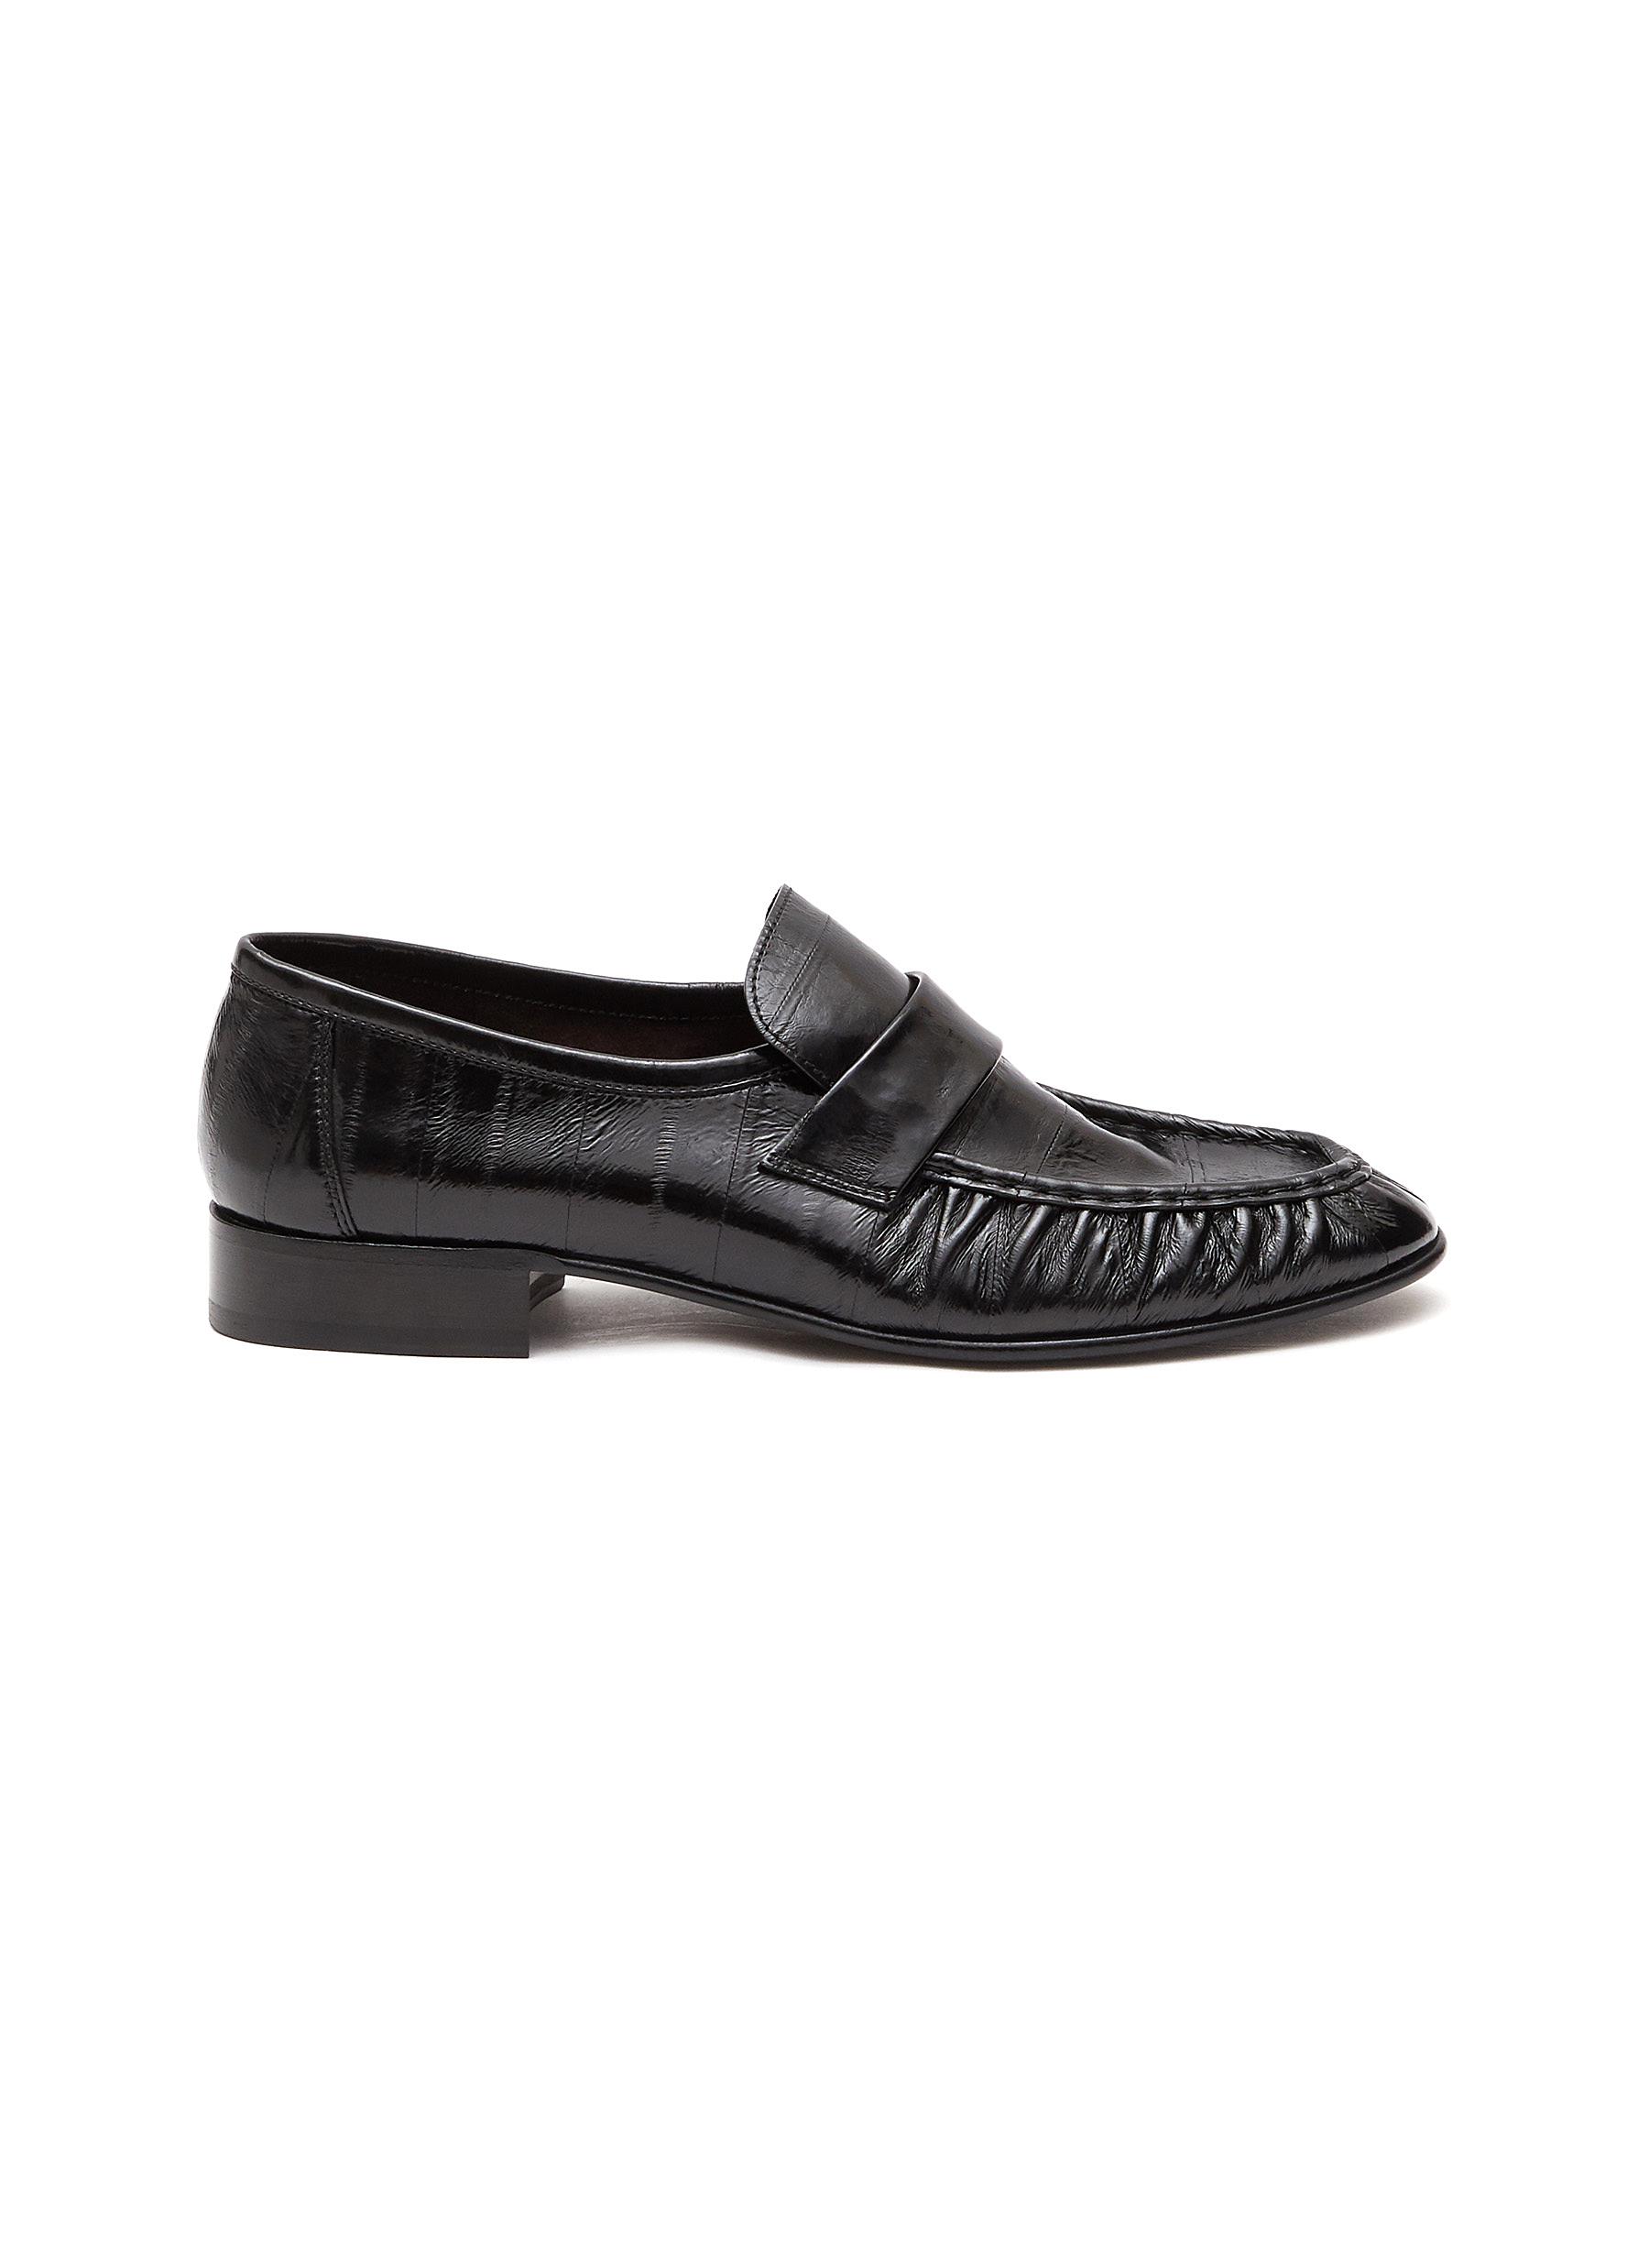 THE ROW ALMOND TOE FLAT EEL SKIN LEATHER LOAFERS